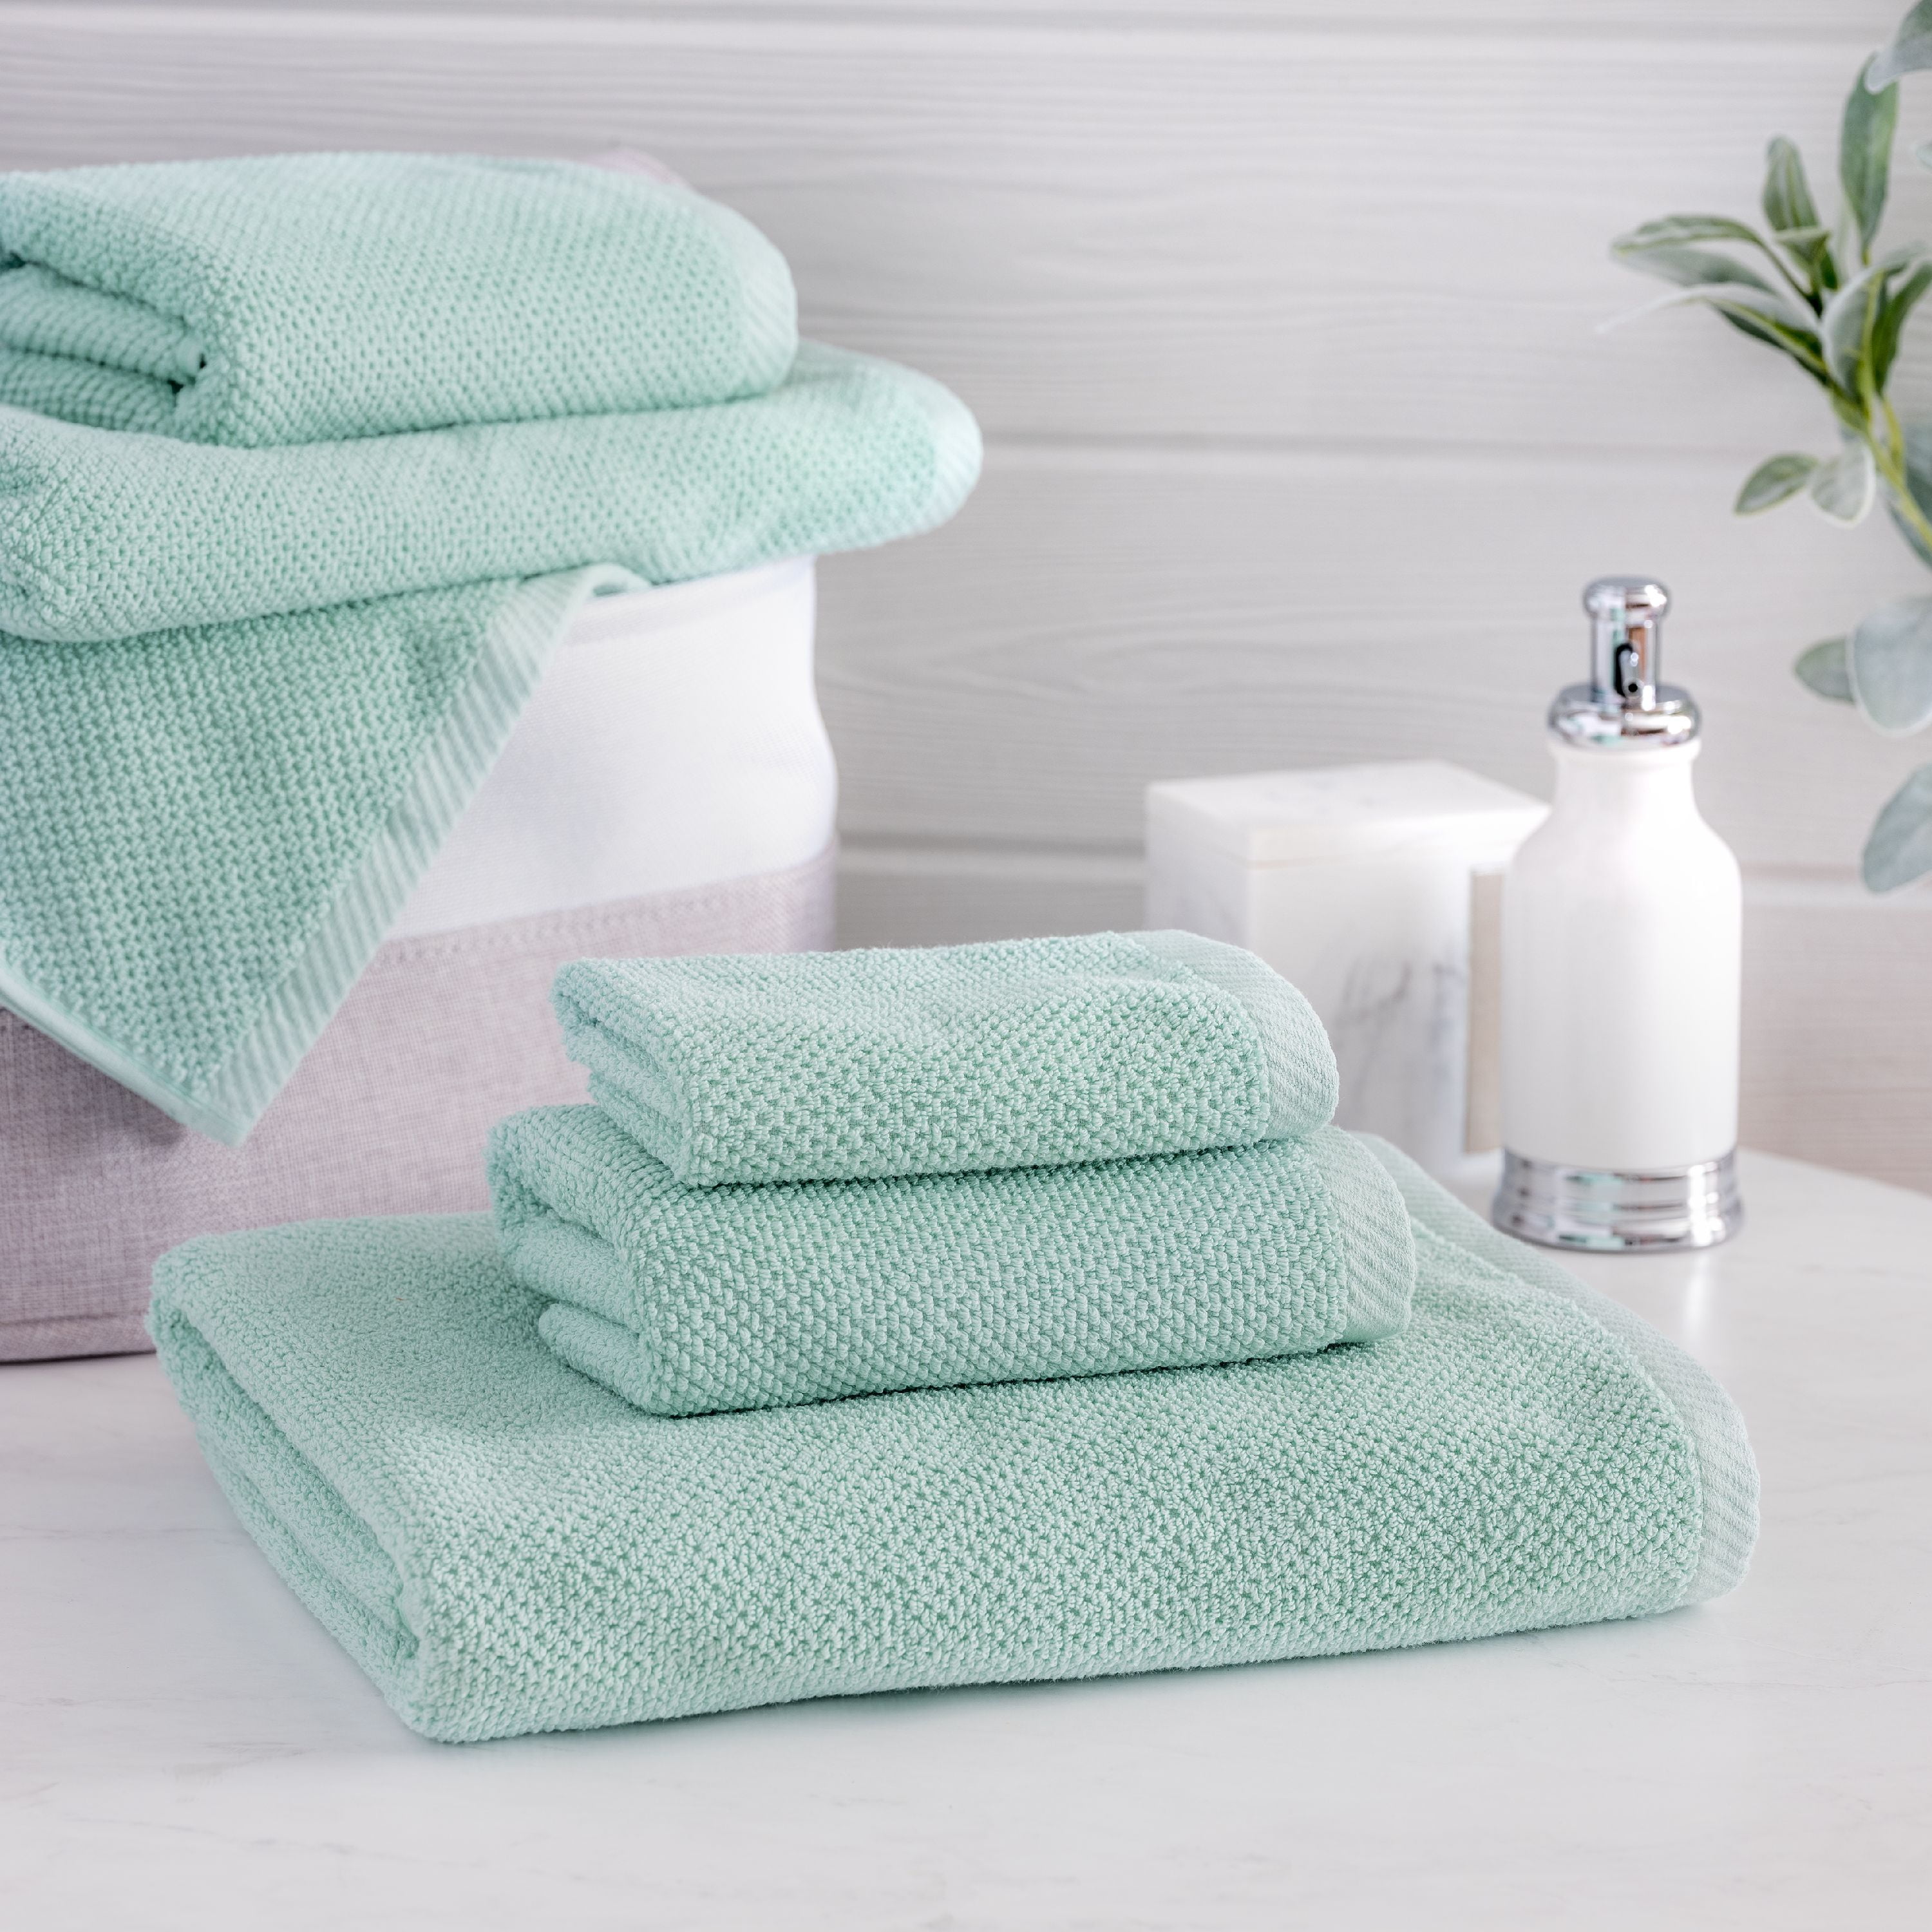 Spa-Hotel Quality 100% Cotton Absorbent 600 GSM 6PC Bathroom Towel Set TEAL 